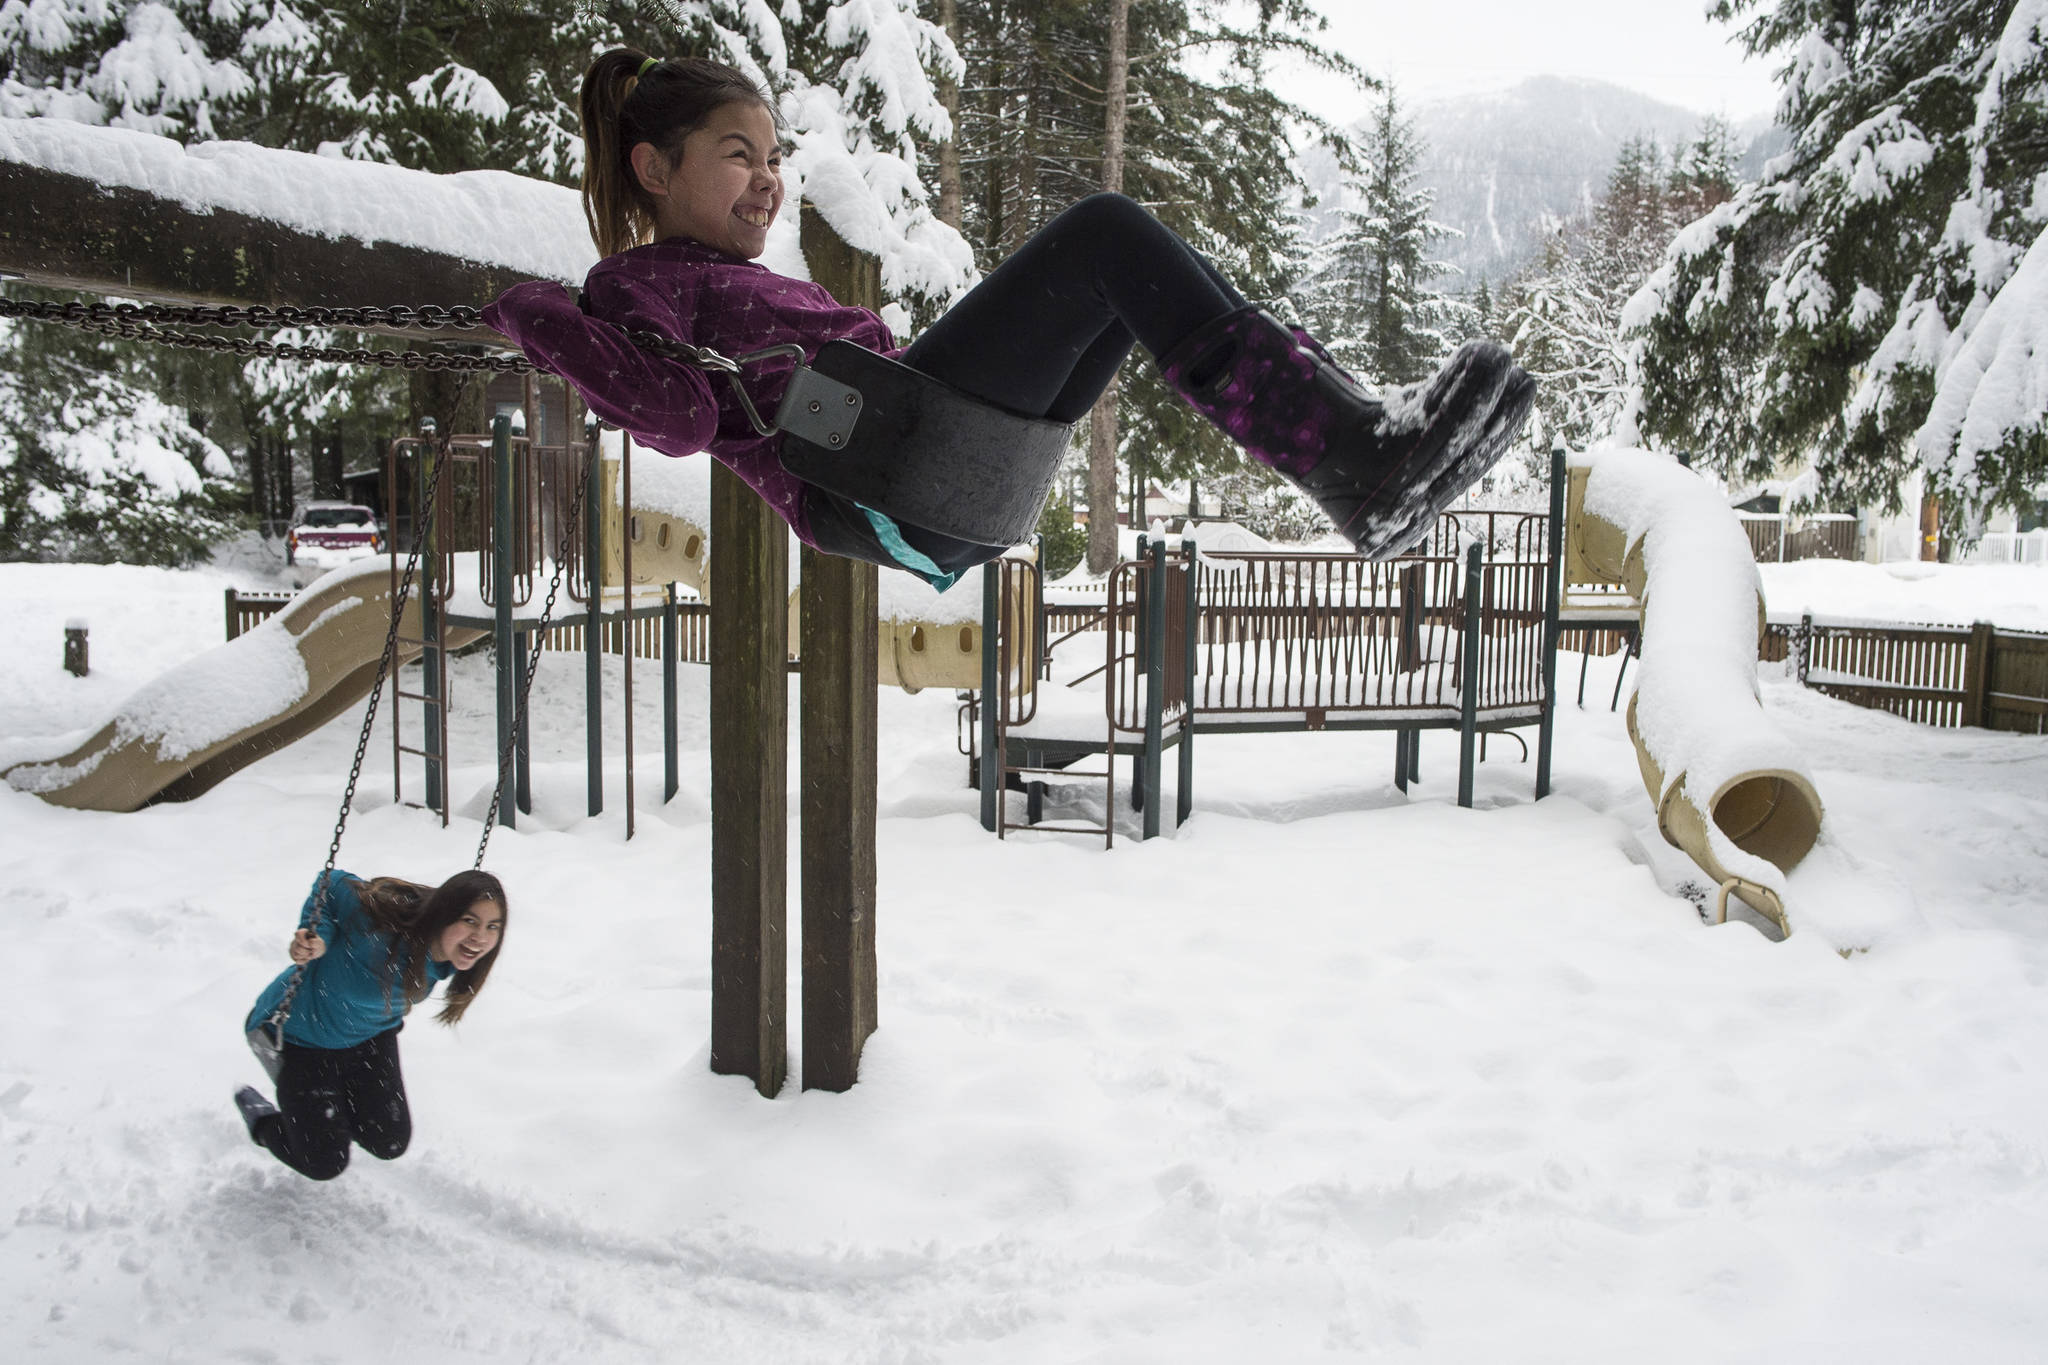 As Juneau ages, so too does parks plan